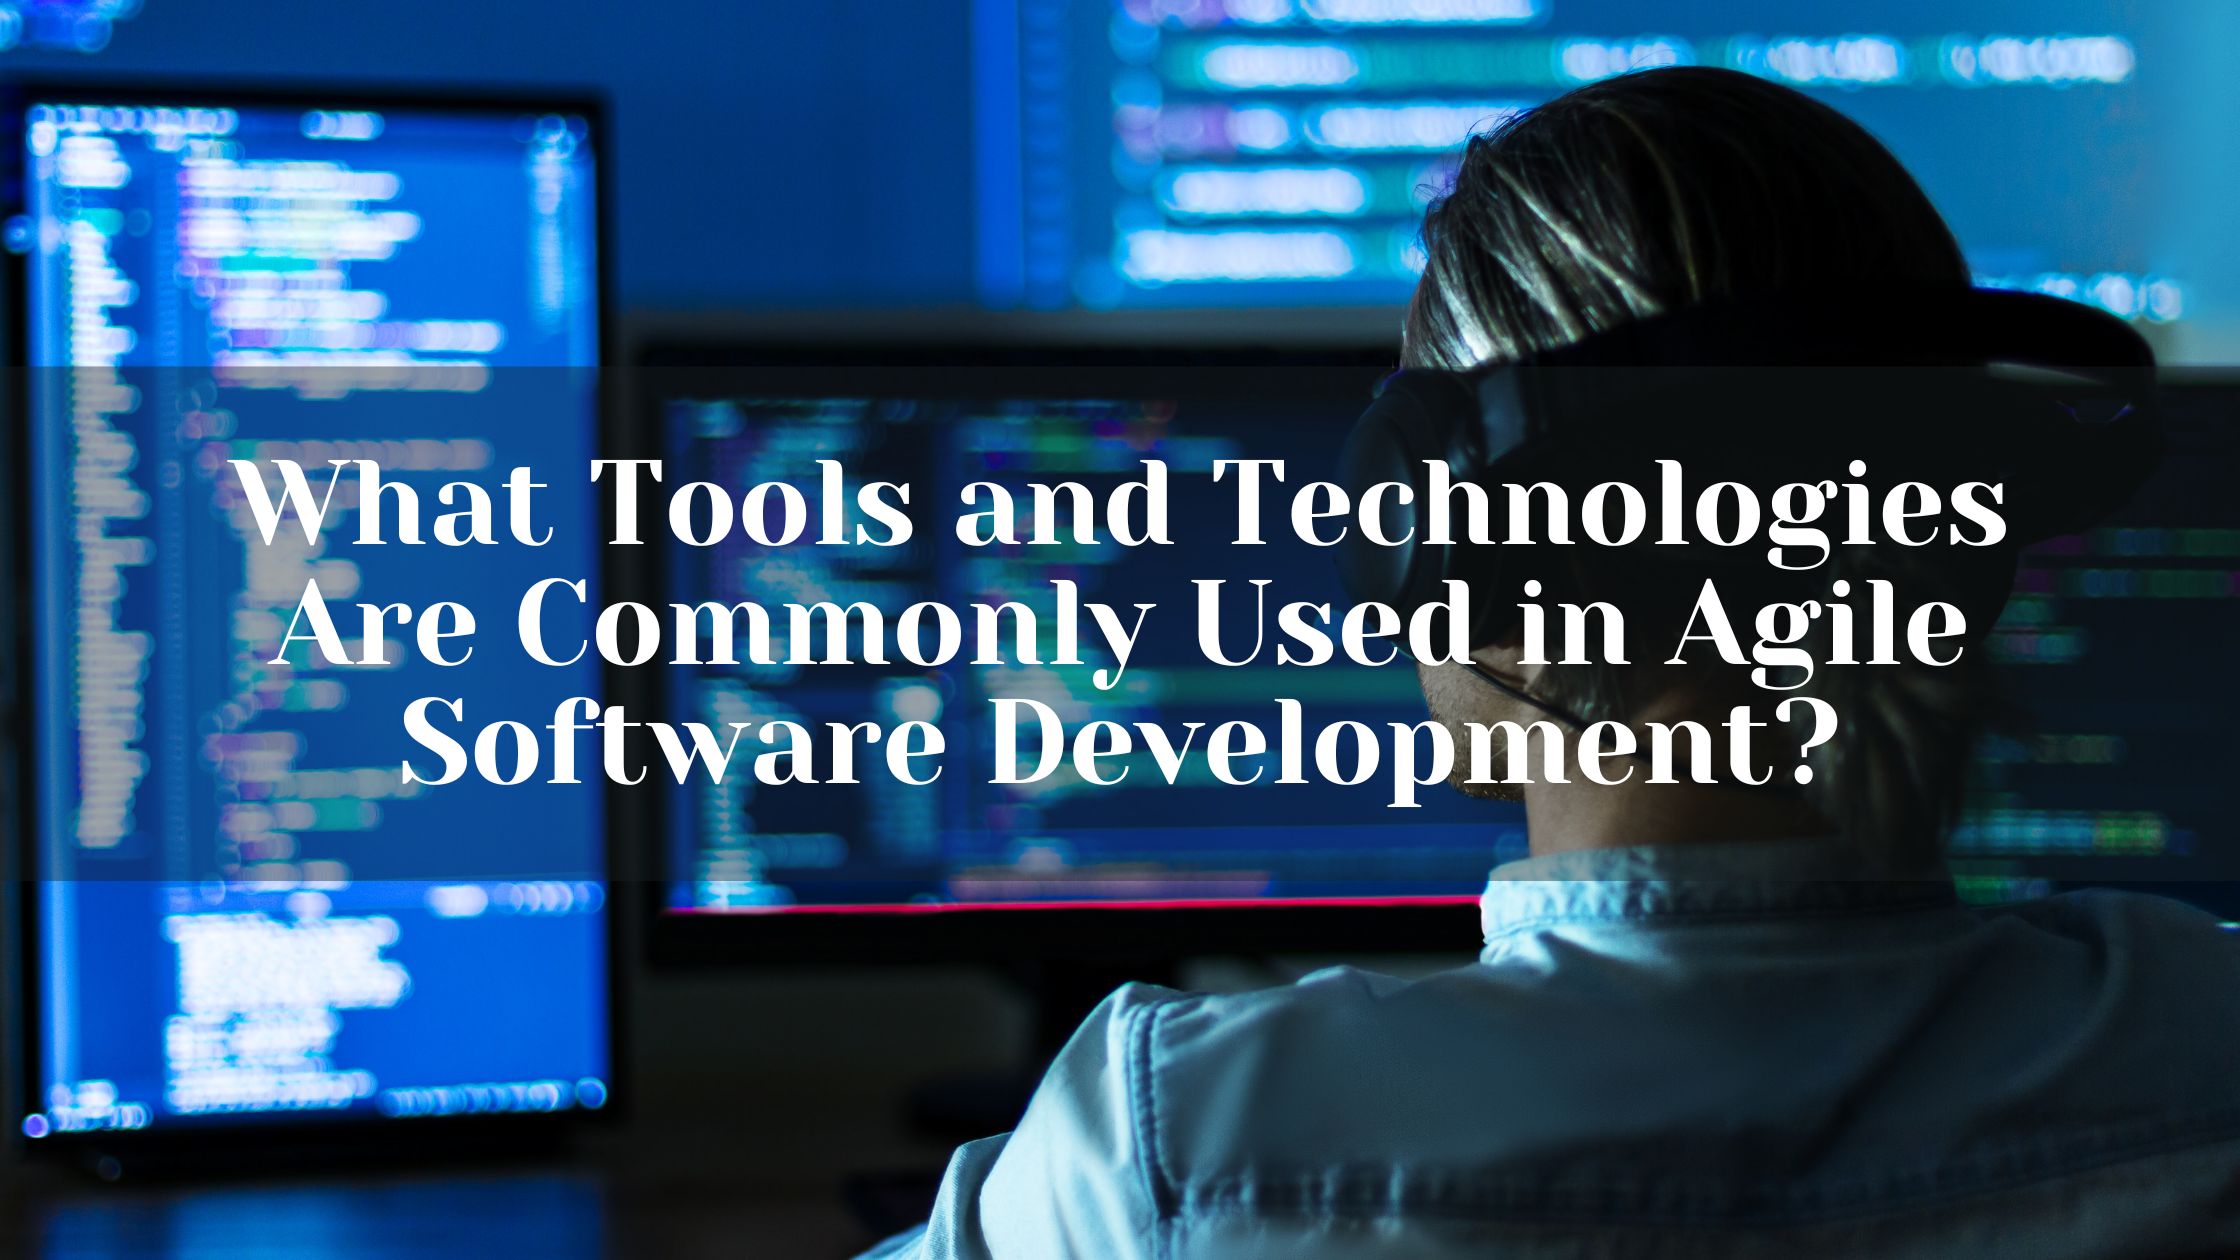 What Tools and Technologies Are Commonly Used in Agile Software Development